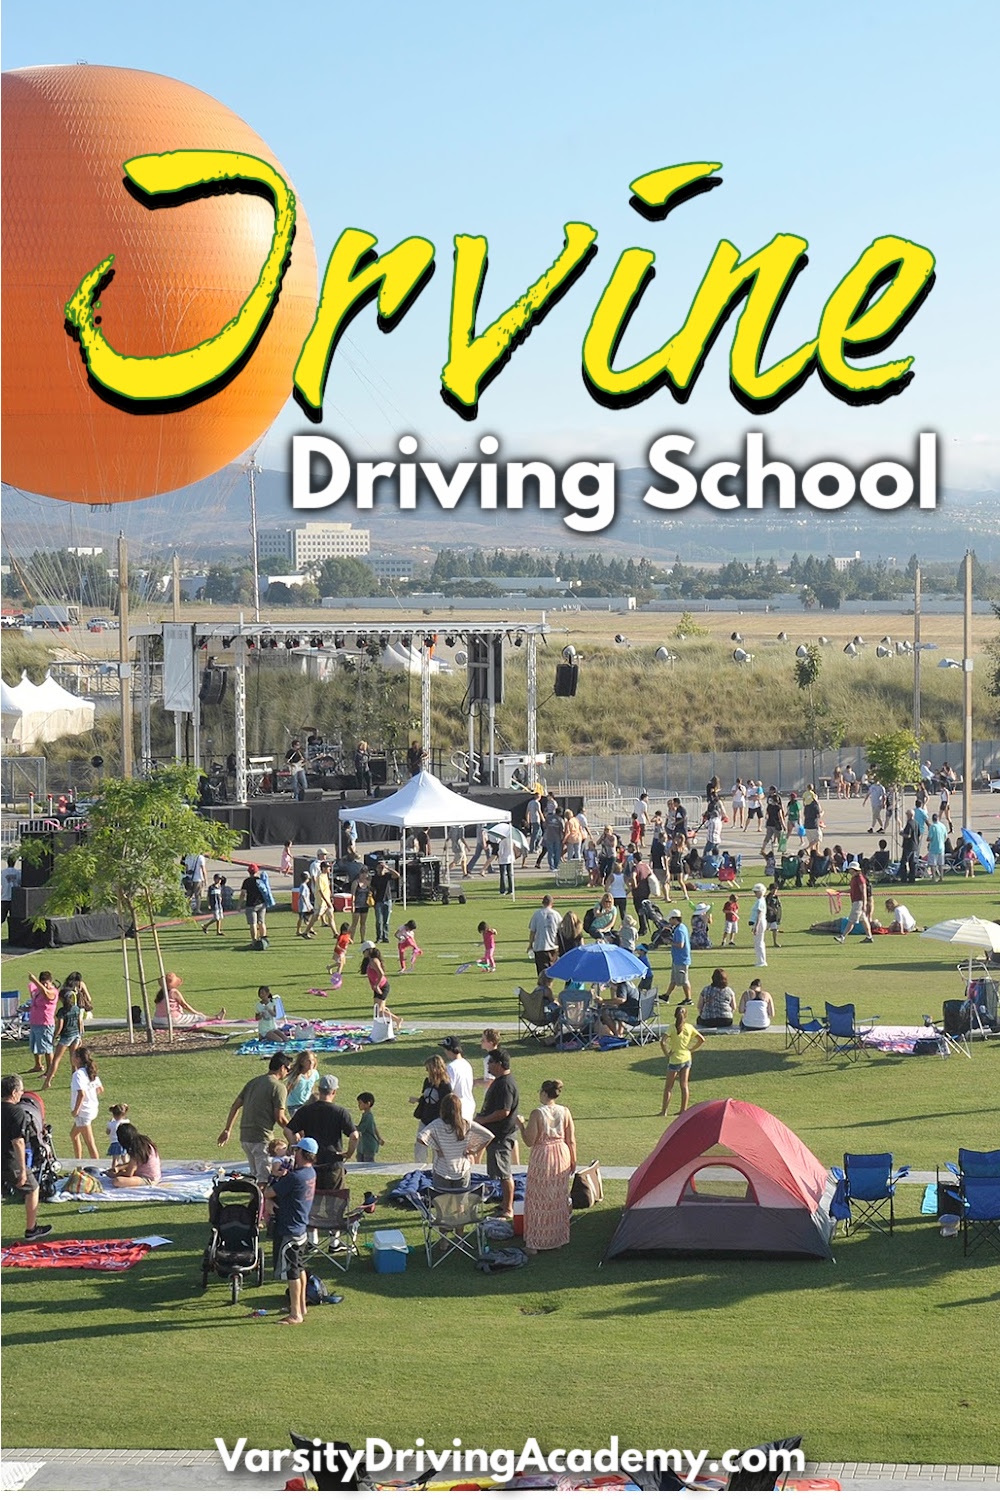 Varsity Driving Academy is the #1 rated Irvine Driving School and your top choice for driver's education training in Irvine! 